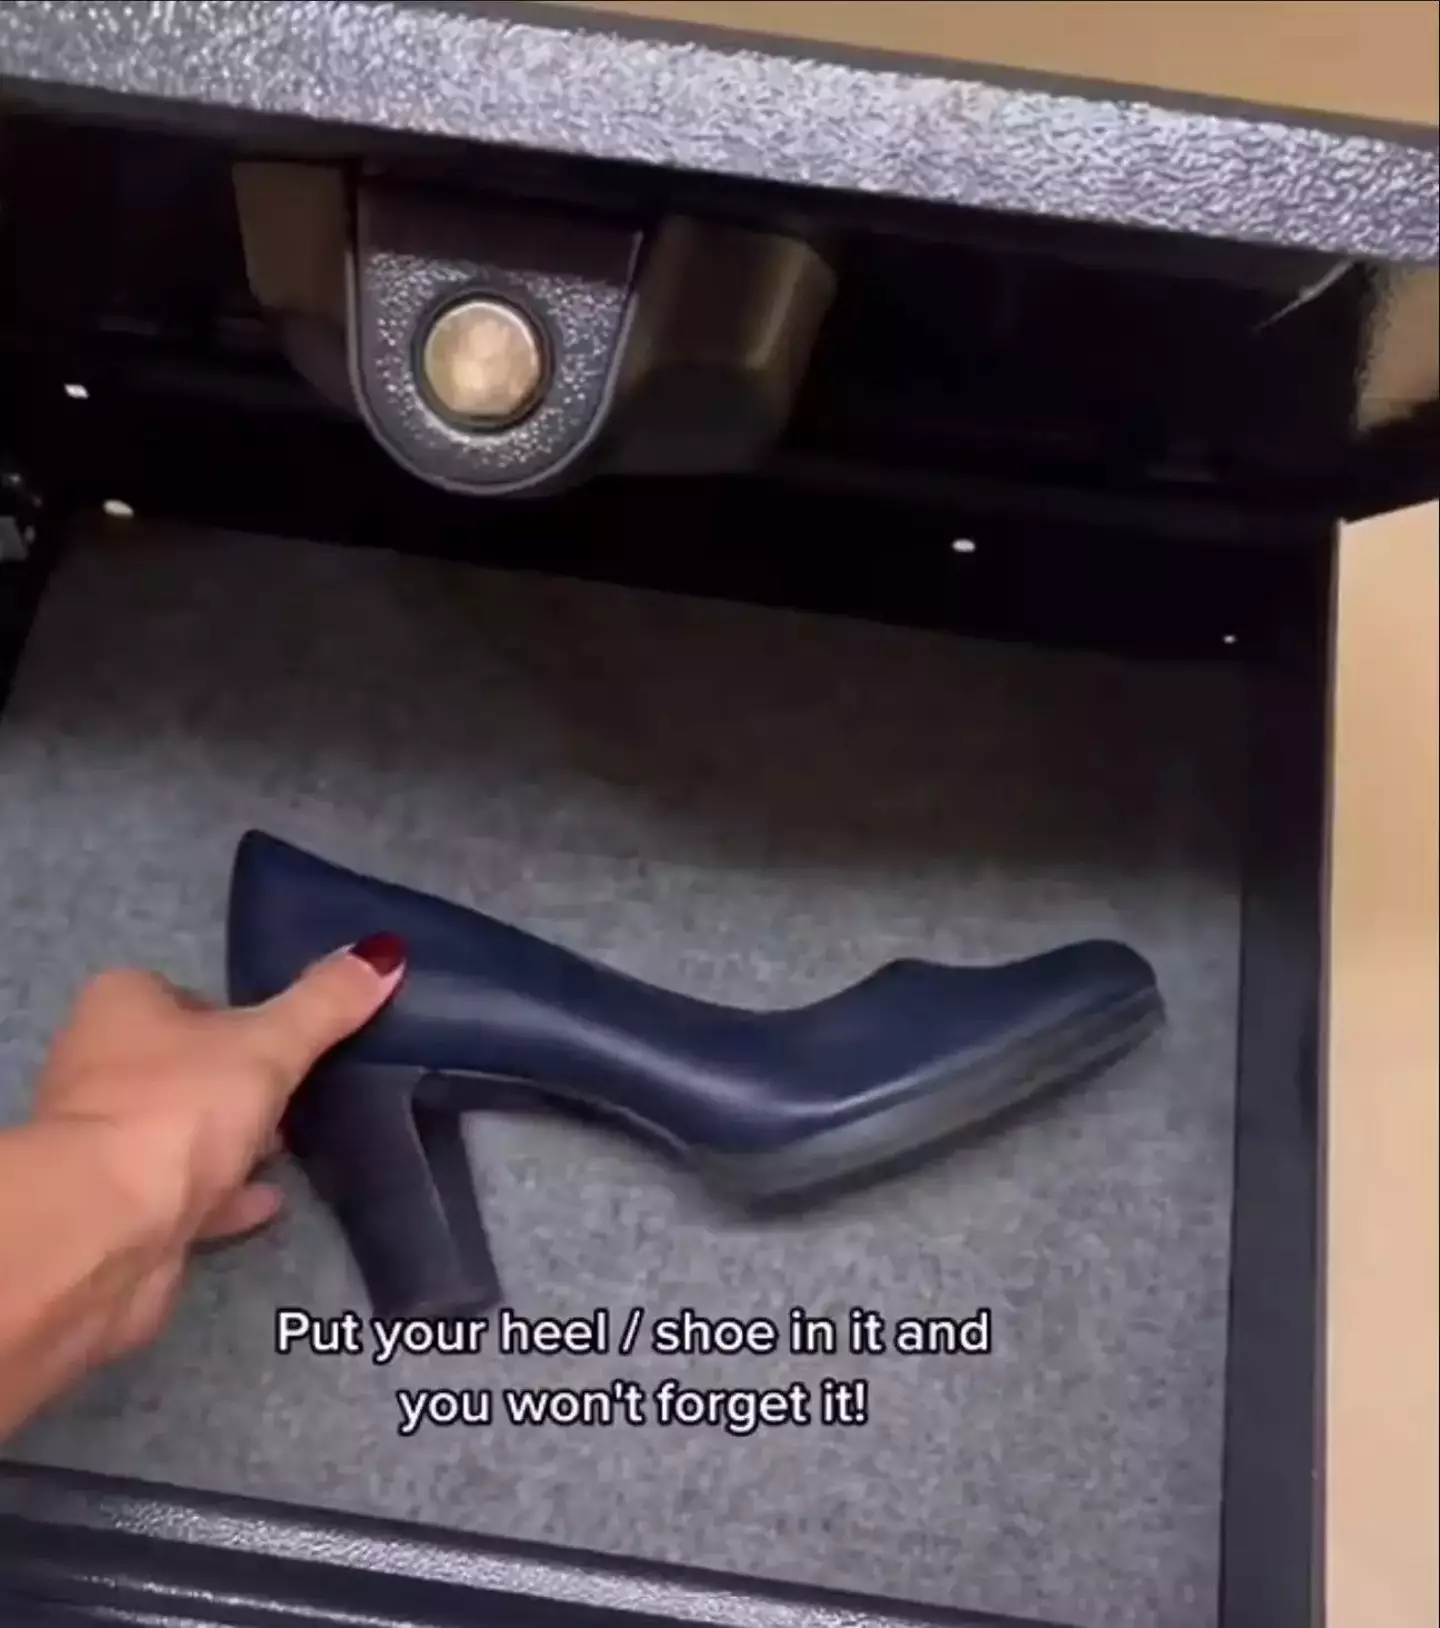 Shoe in a safe?!